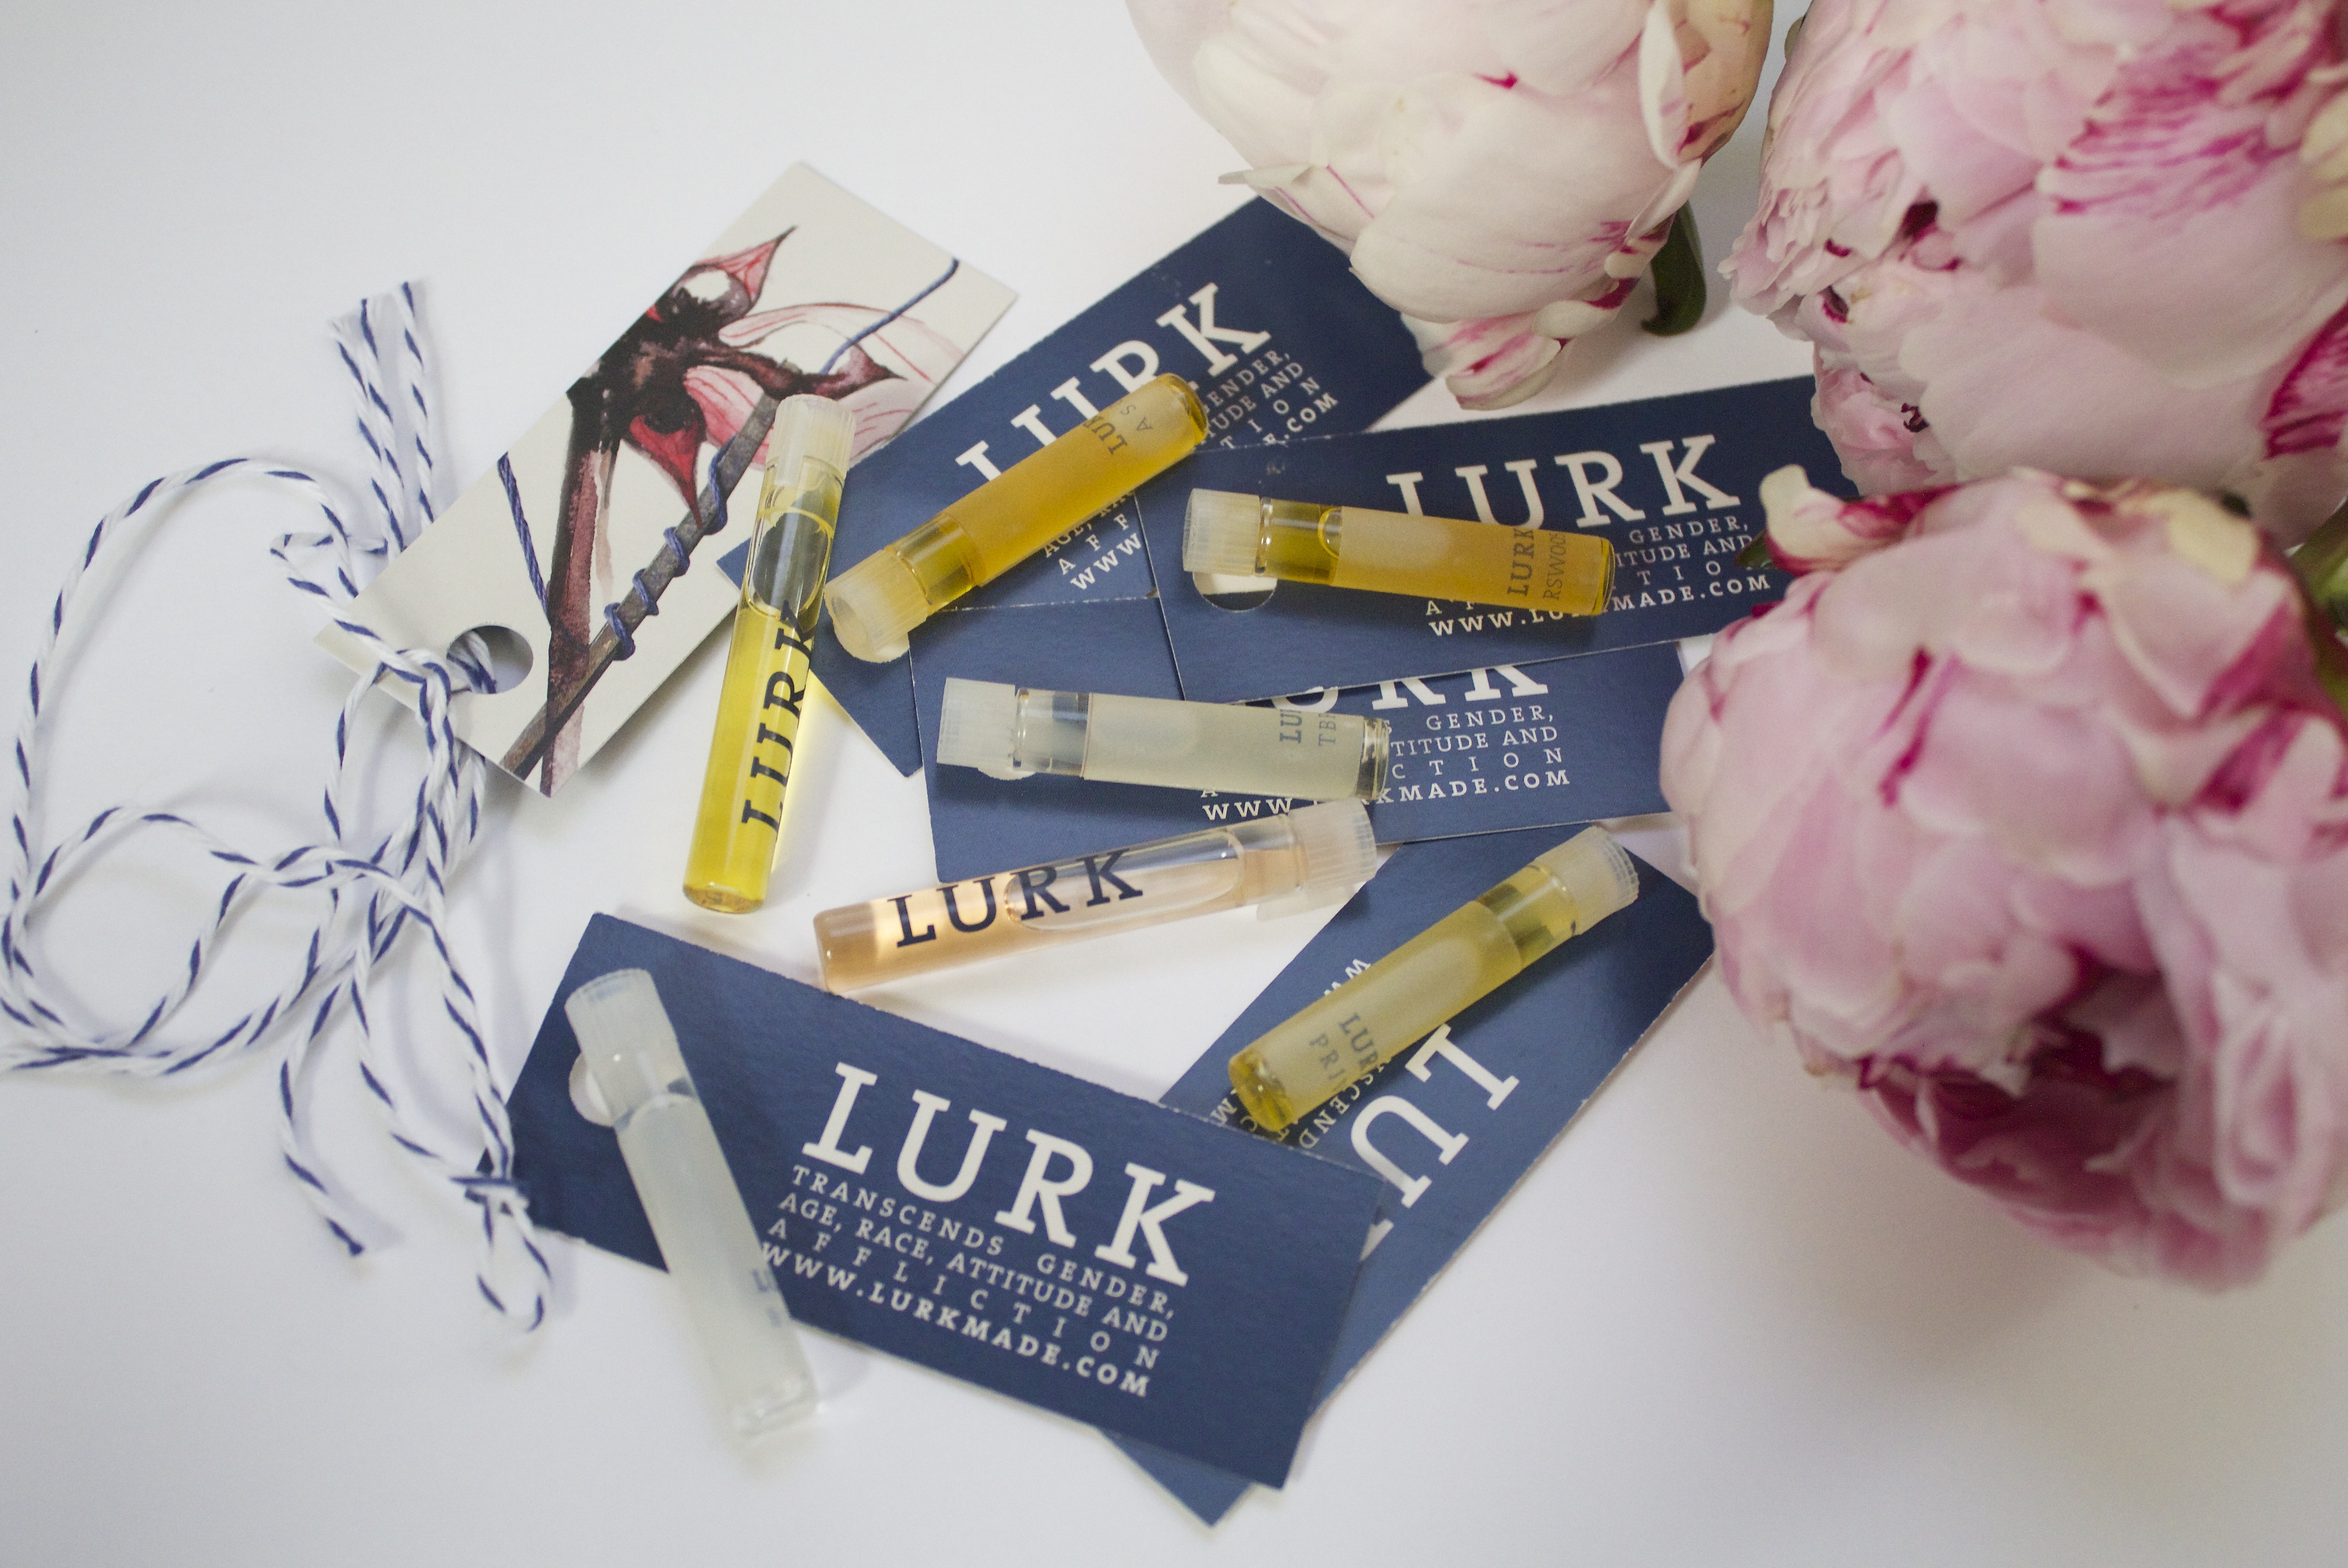 Lurk: Fragrance Without Compromise